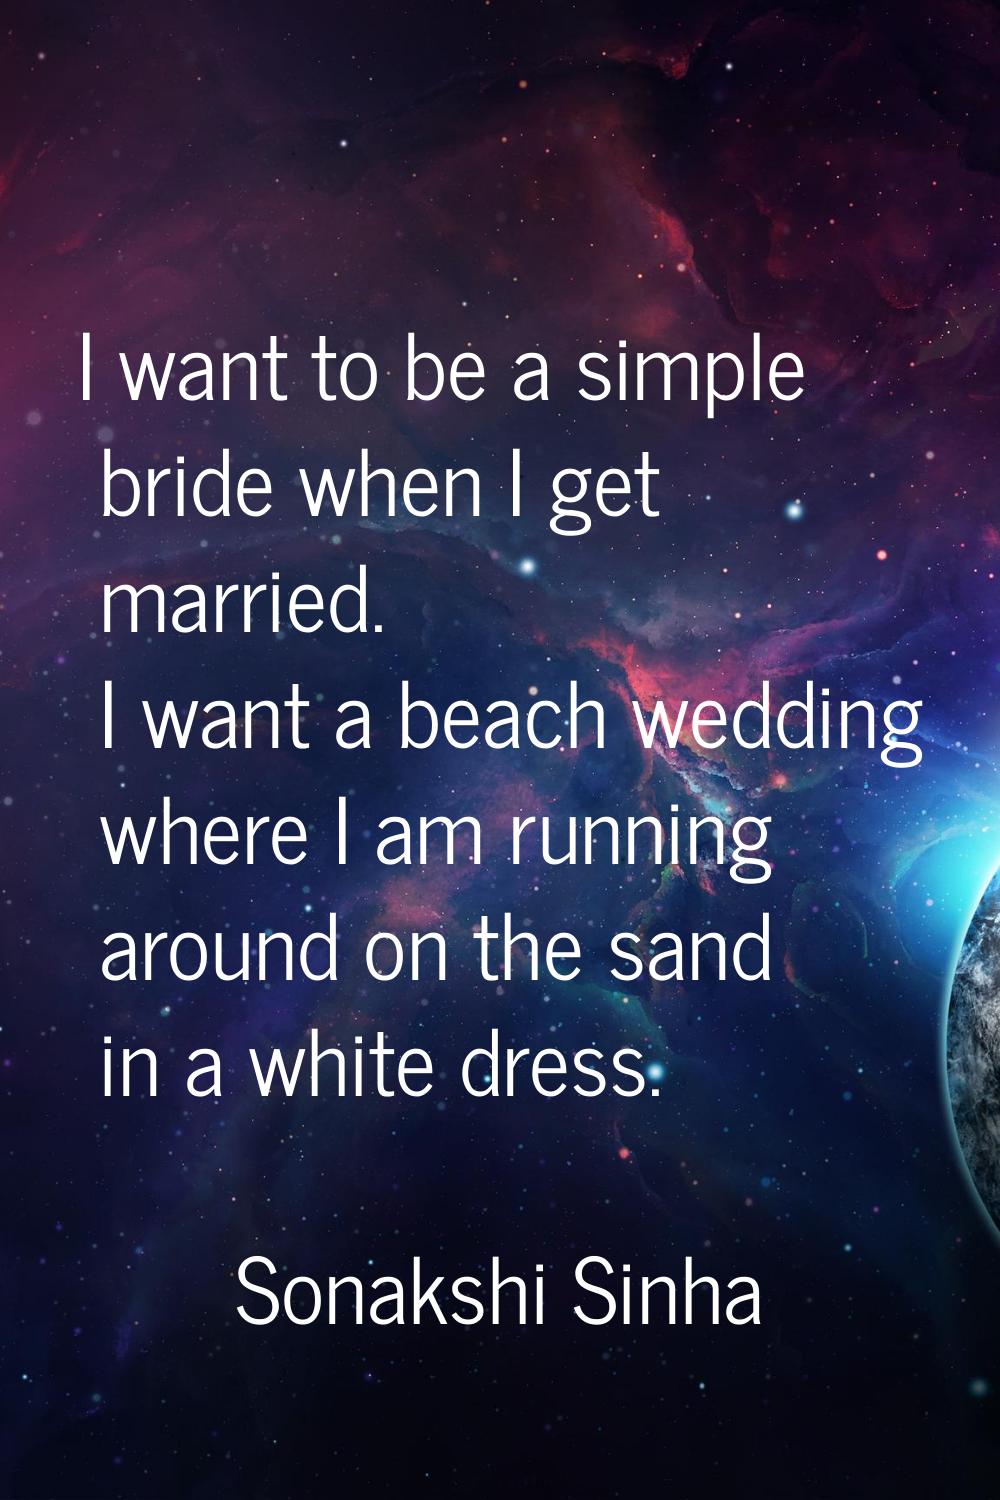 I want to be a simple bride when I get married. I want a beach wedding where I am running around on